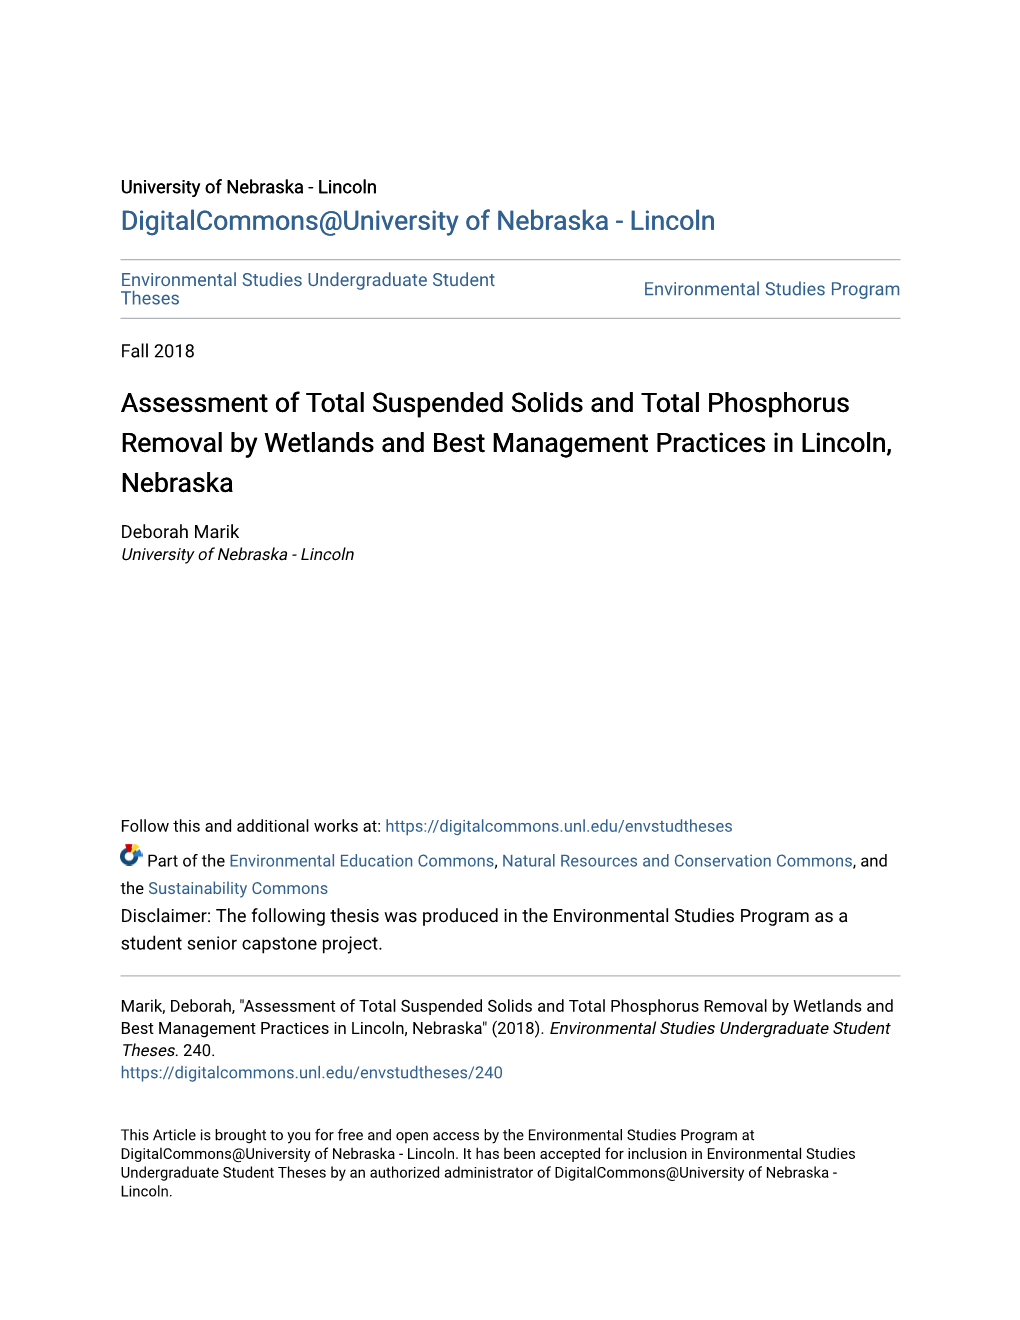 Assessment of Total Suspended Solids and Total Phosphorus Removal by Wetlands and Best Management Practices in Lincoln, Nebraska